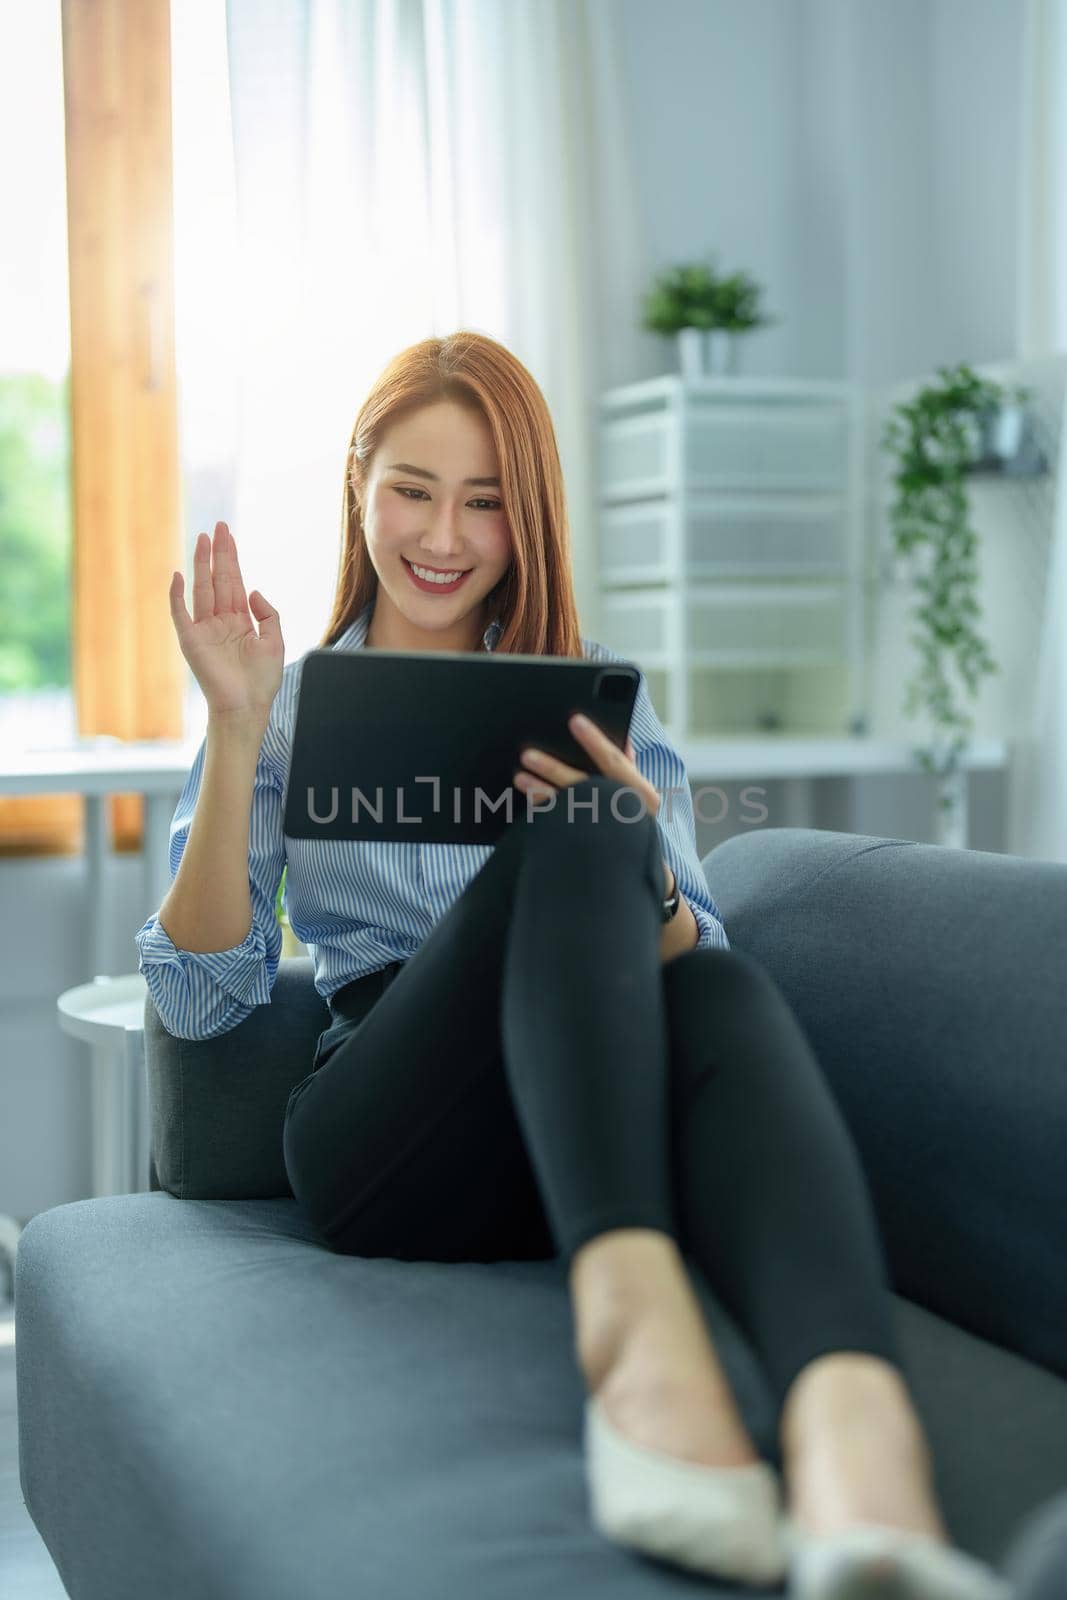 Conversation, online teaching, explaining, meeting, business owner, portrait of an Asian woman using a tablet for video conference with colleagues. work from home in the era of corona virus by Manastrong